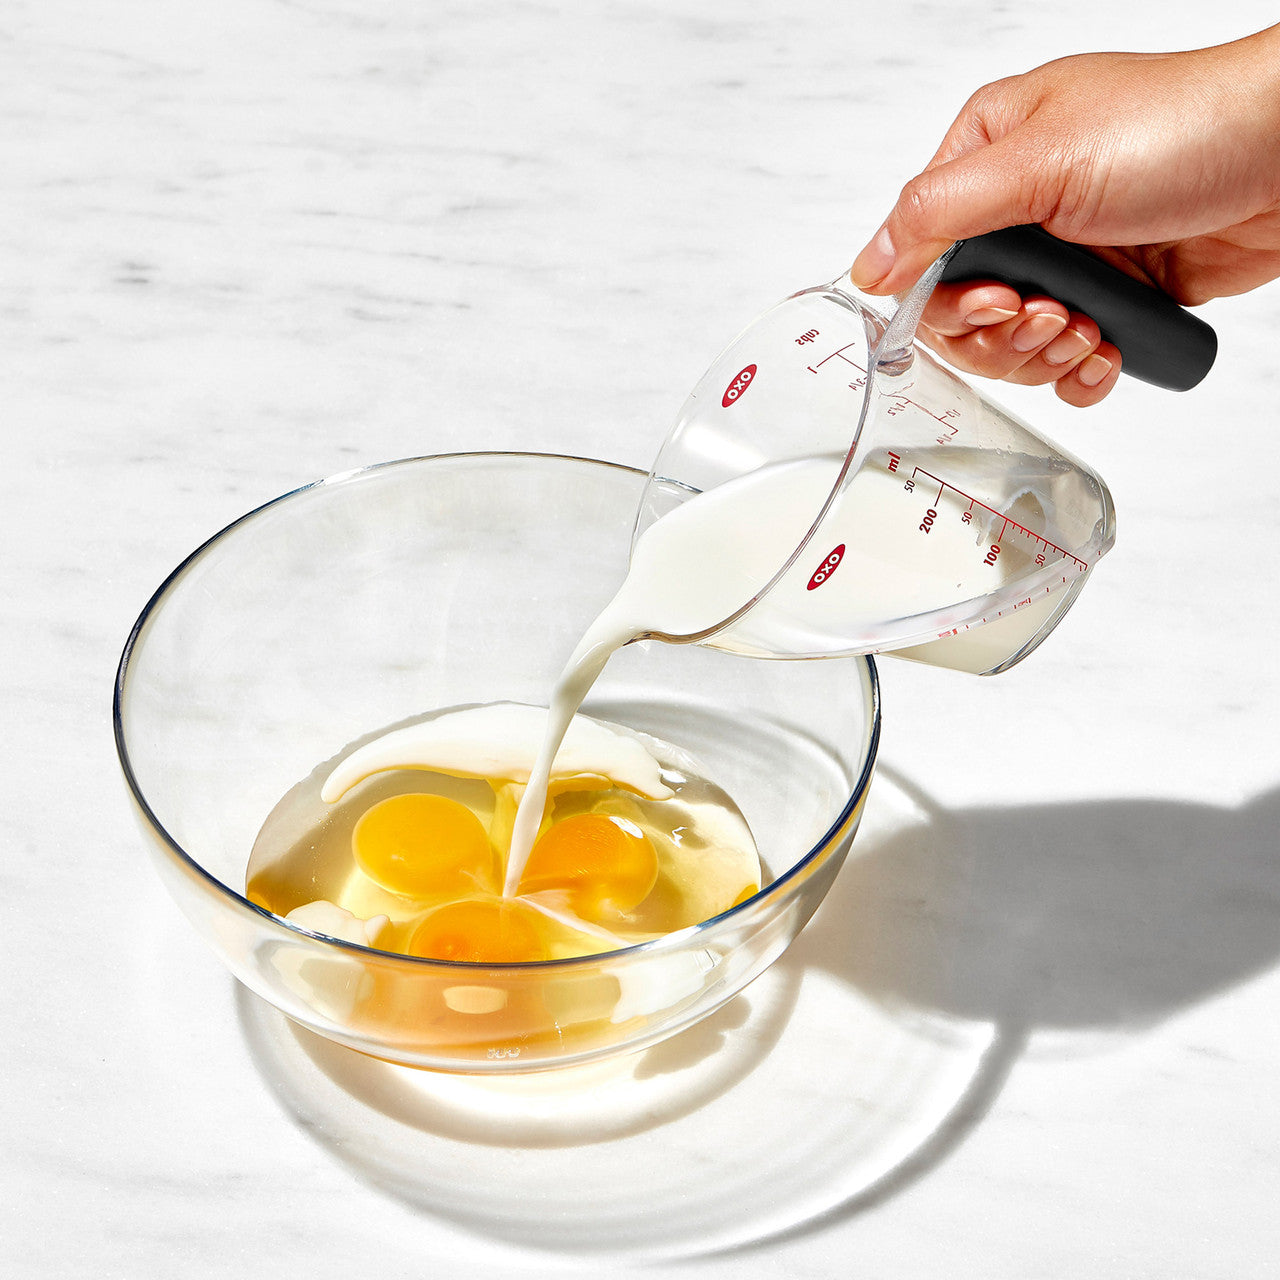 Oxo Angled Measuring Cup - 1 Cup/ 250ml